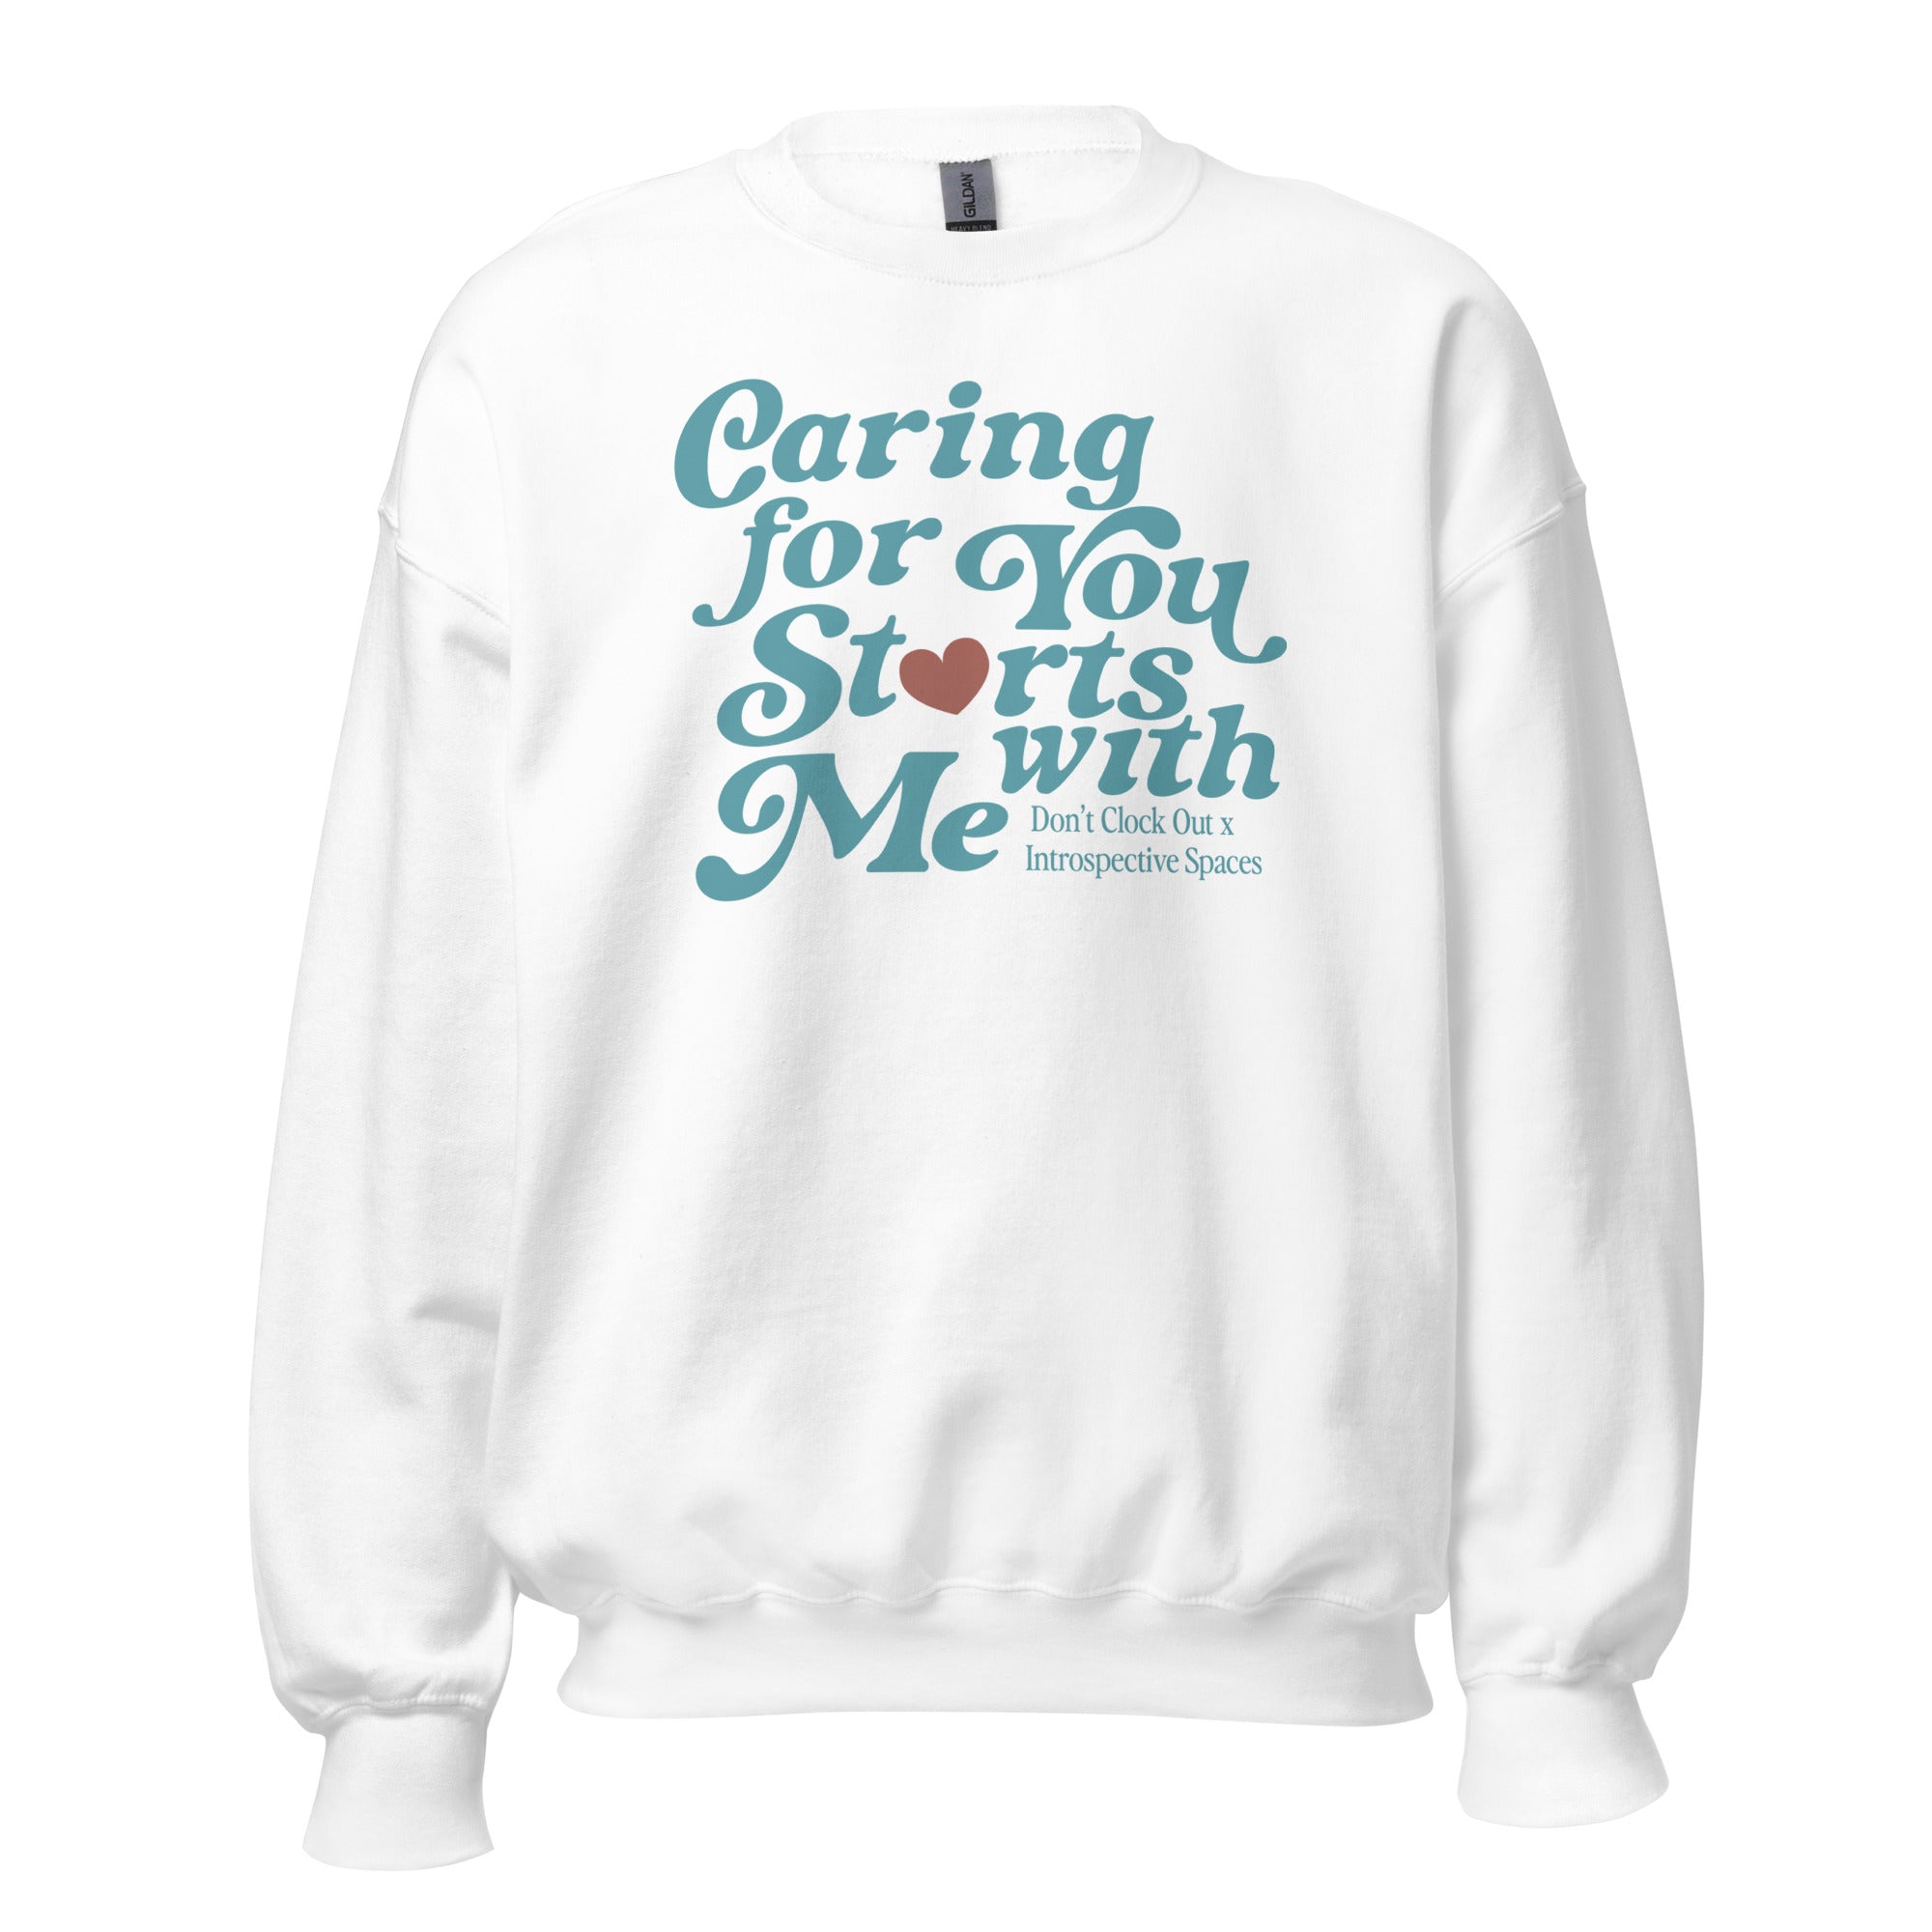 Caring for You Starts With Me Crewneck